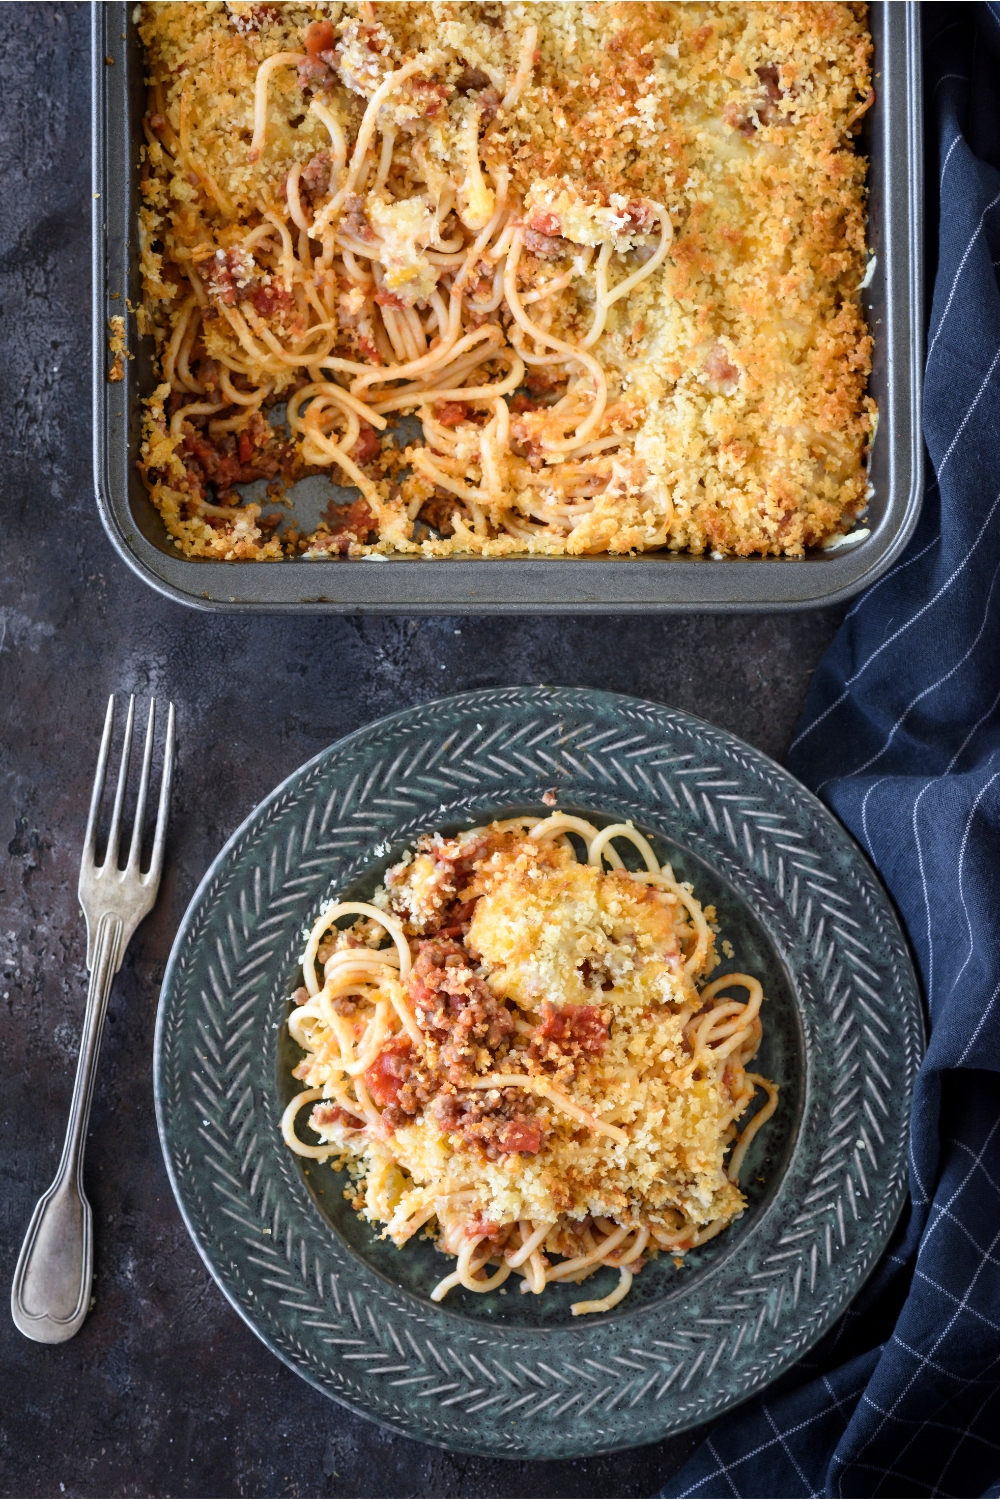 A serving of spaghetti casserole piled high next to a fork and the rest of the casserole.